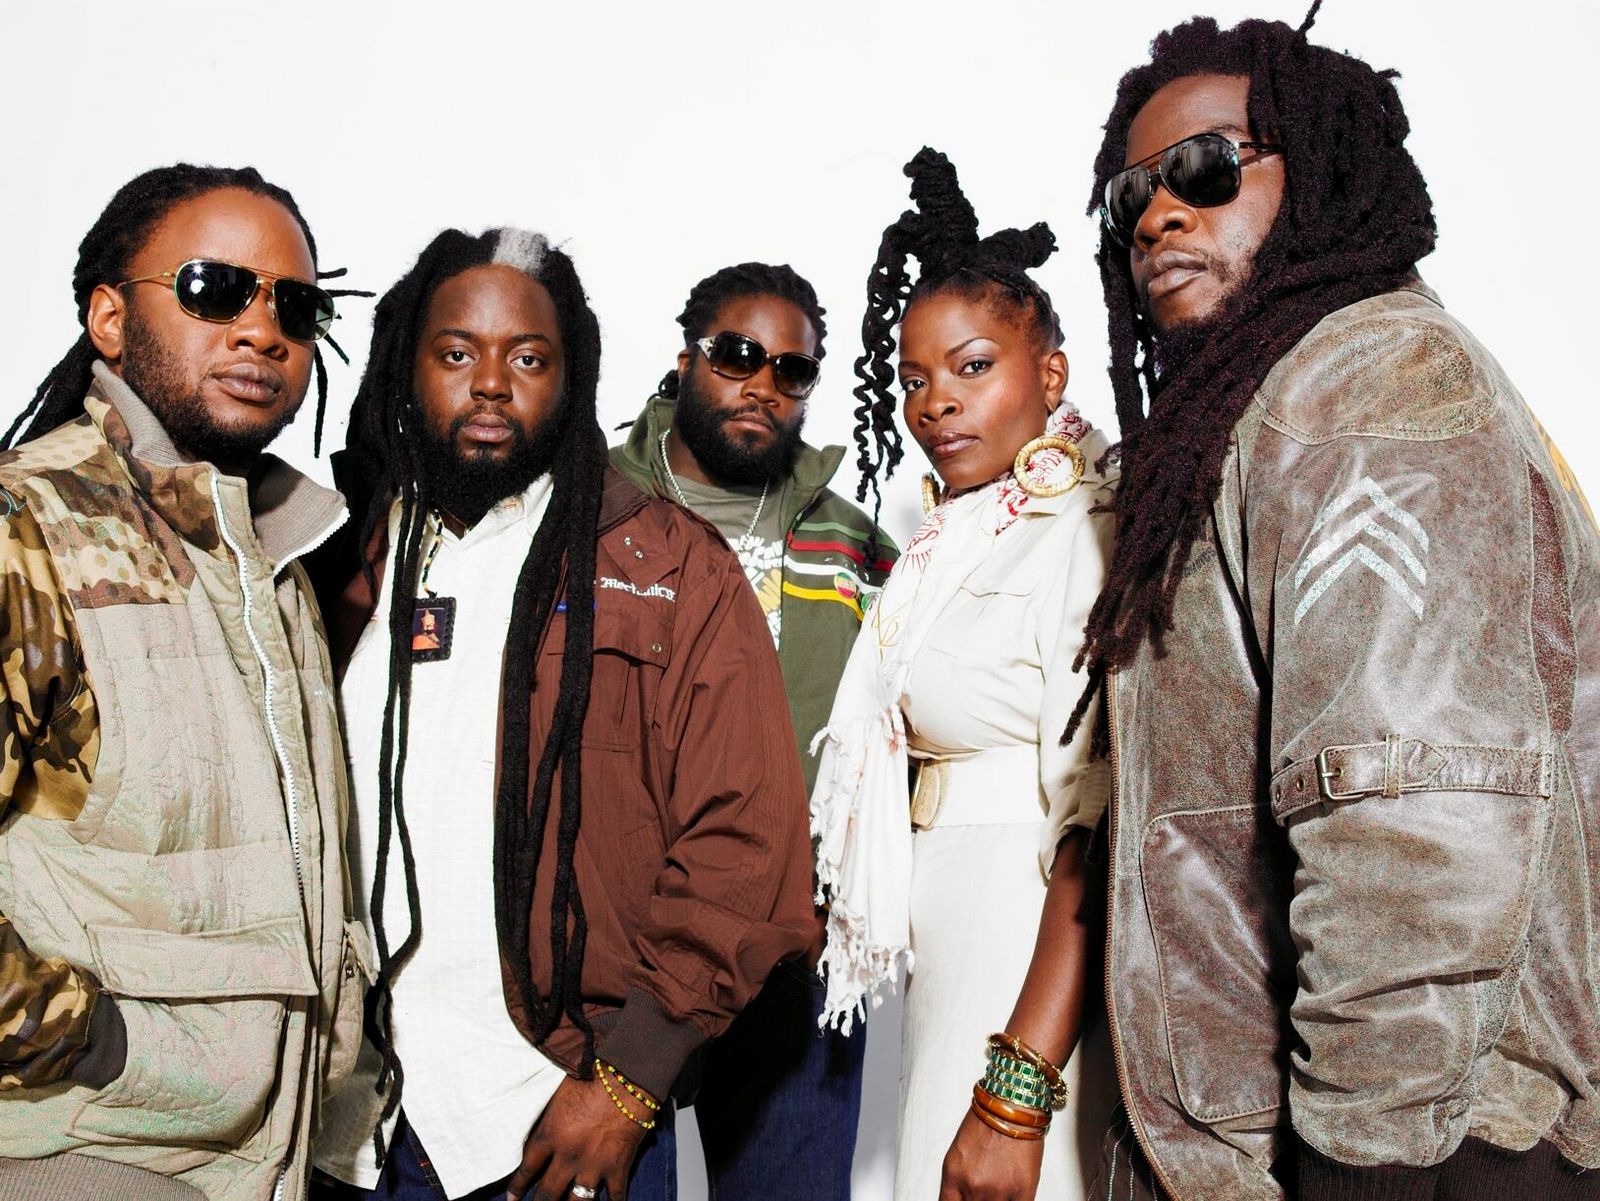 Morgan Heritage Tickets Finally Out for Sale